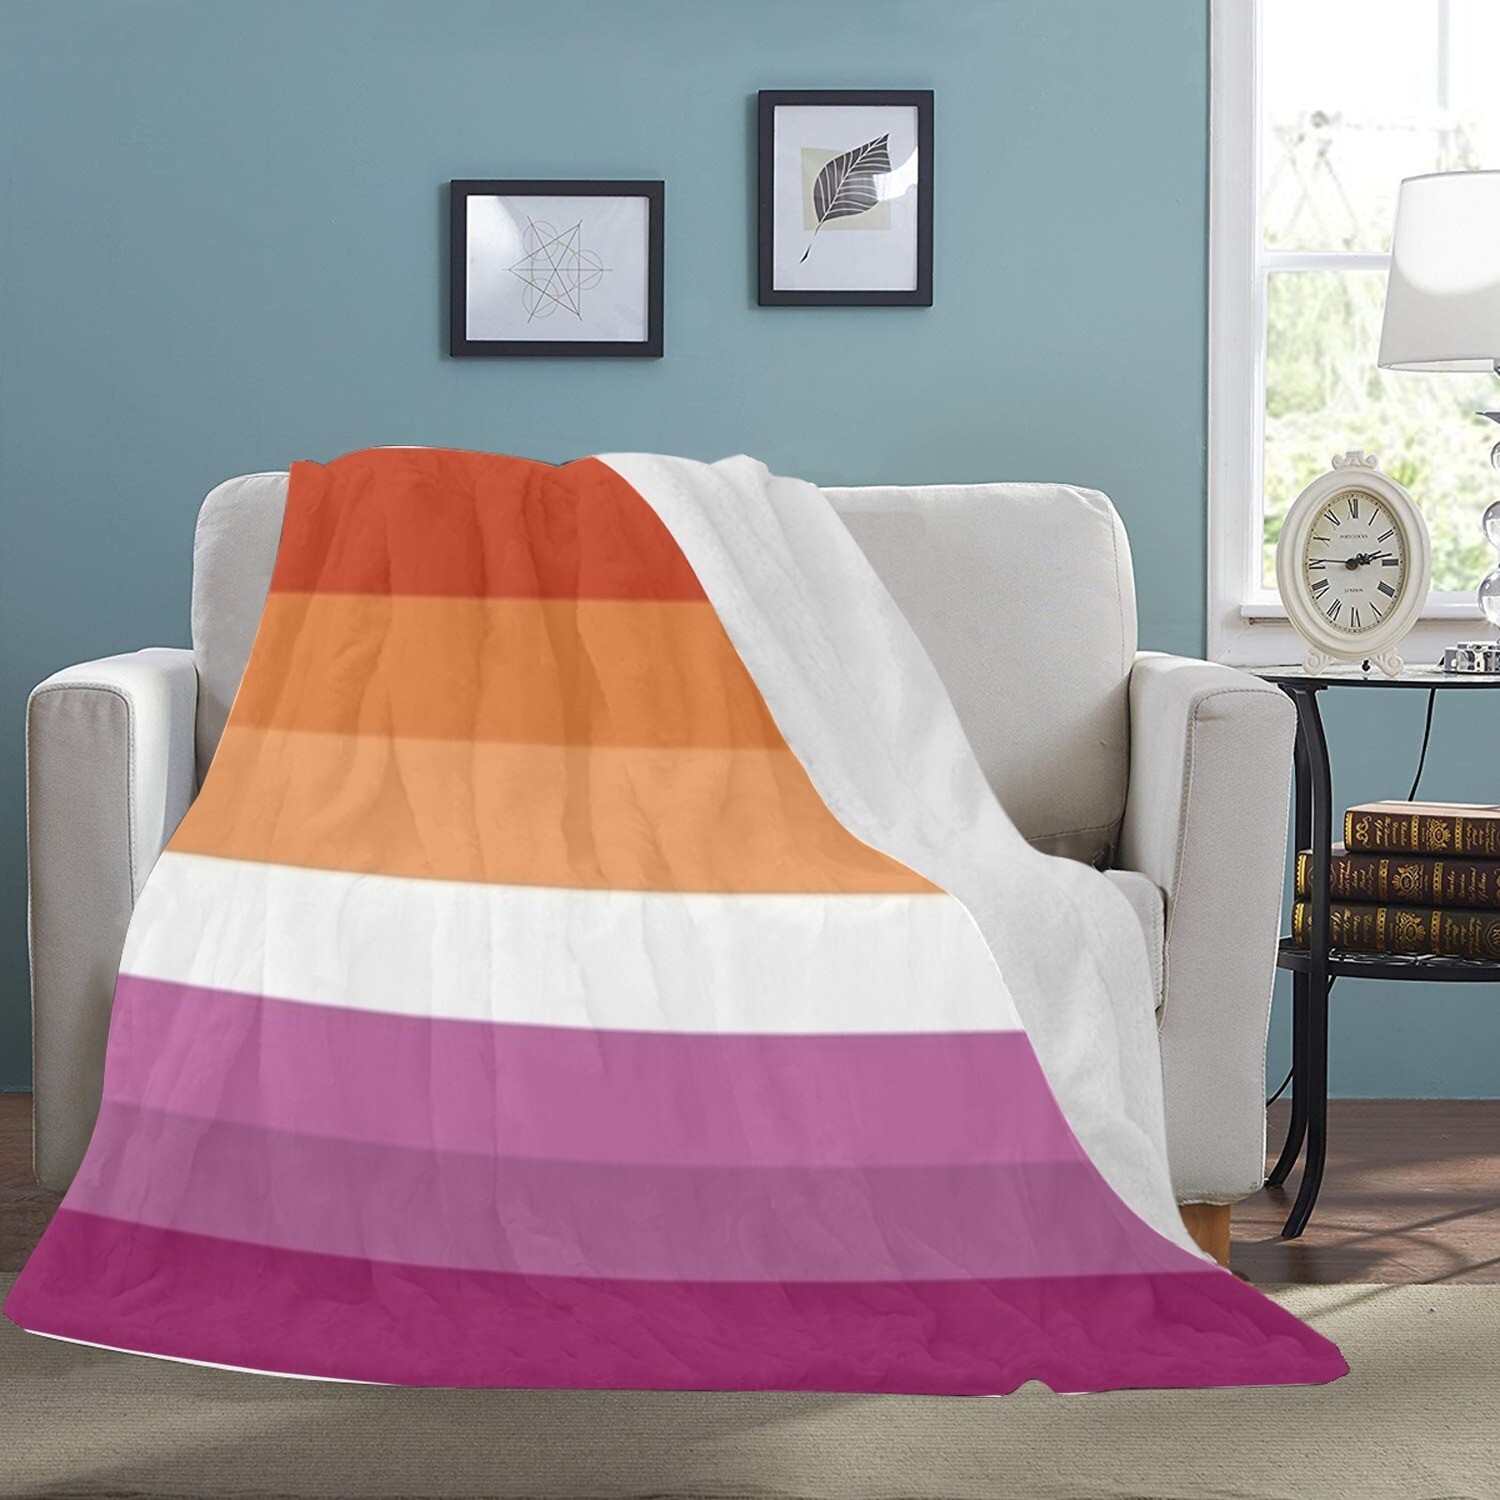 🤴🏽👸🏽🏳️‍🌈 Large Ultra-Soft Micro Fleece Blanket Love is Love Lesbian pride flag created in 2010, gift, gift for her, gift for him, gift for them, 70"x80"